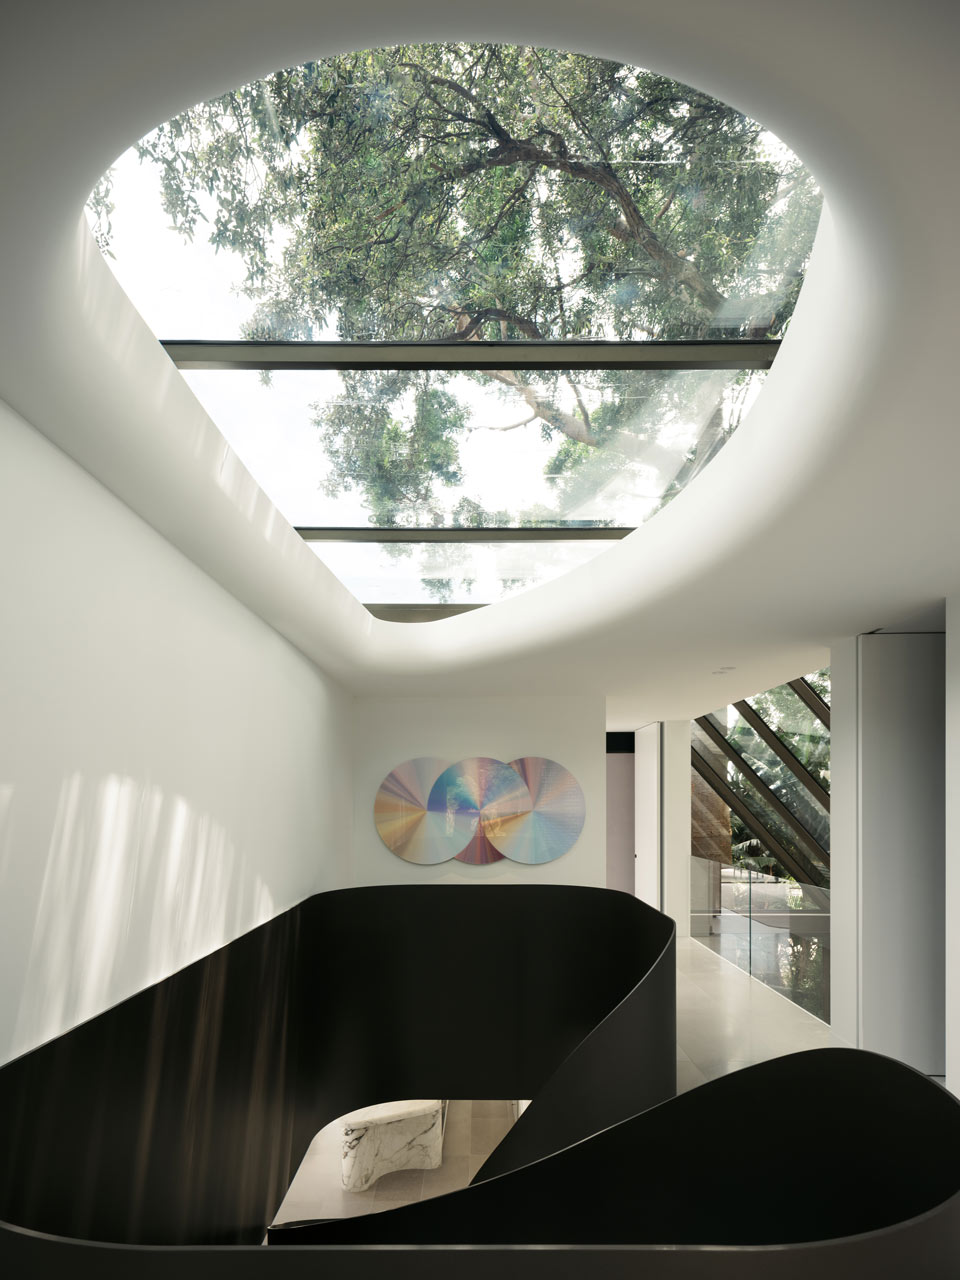 Interior view of a modern home showcasing a sleek, black spiral staircase beneath an oval skylight with views of a tree canopy, complemented by abstract art on the wall.